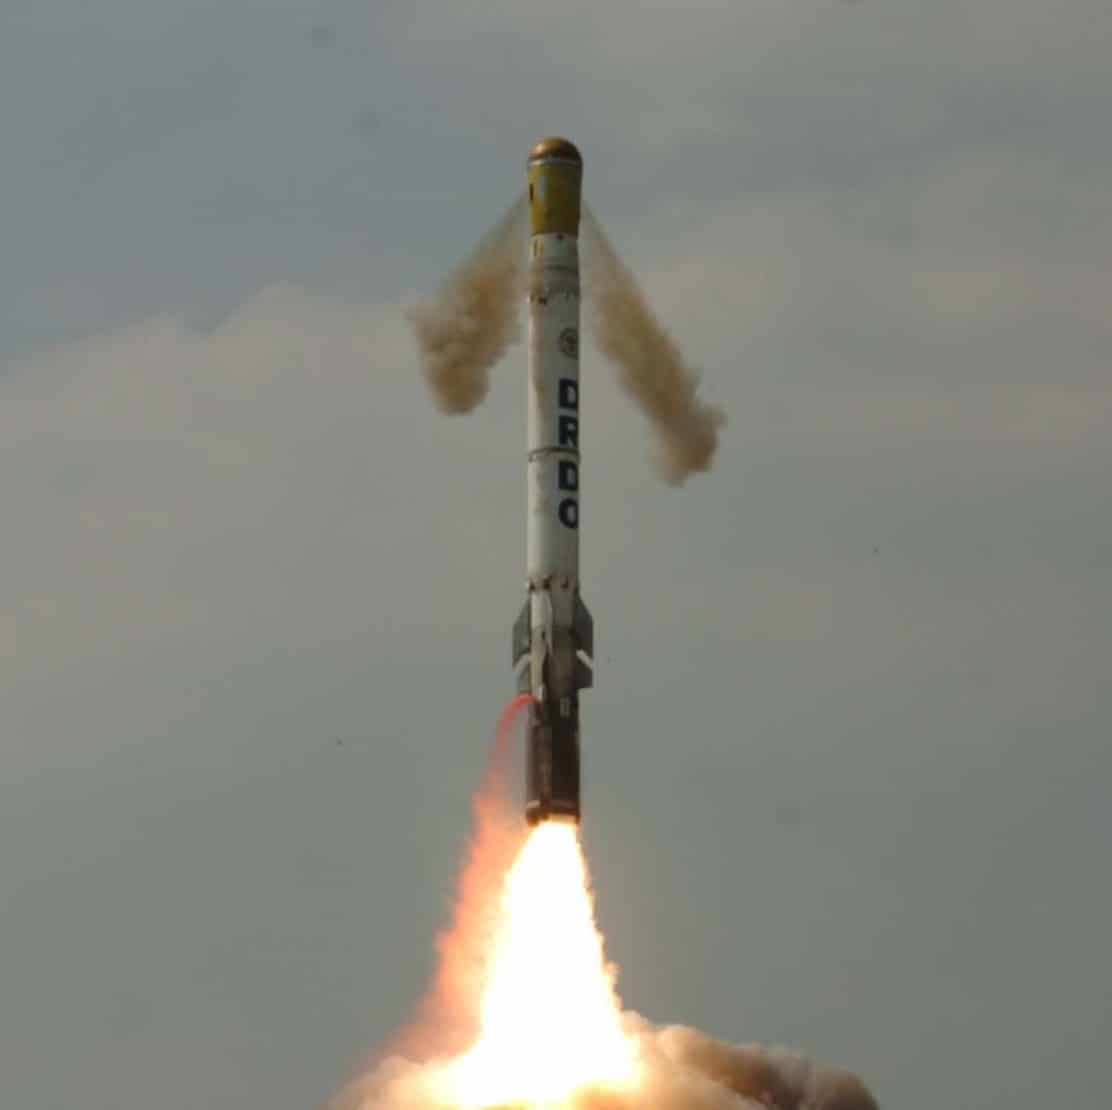 India's nuclear arsenal has efficiently progressed